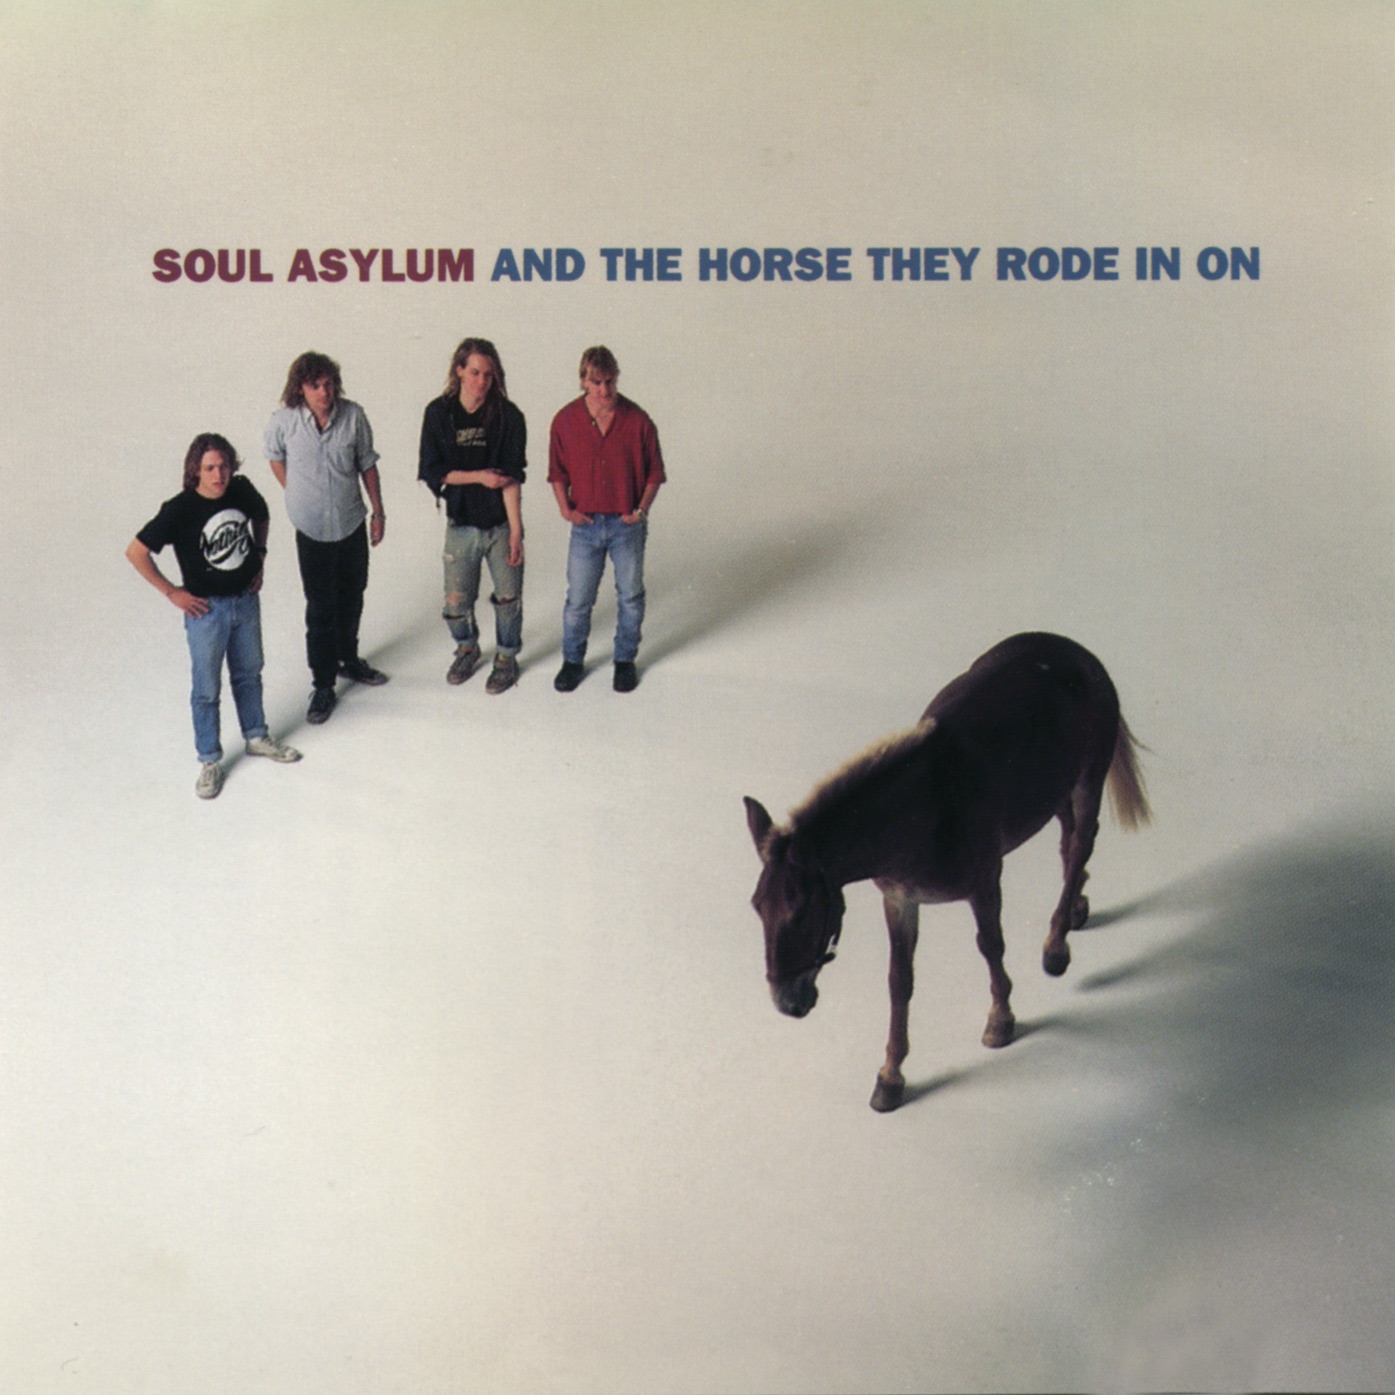 And The Horse They Rode In On by Soul Asylum